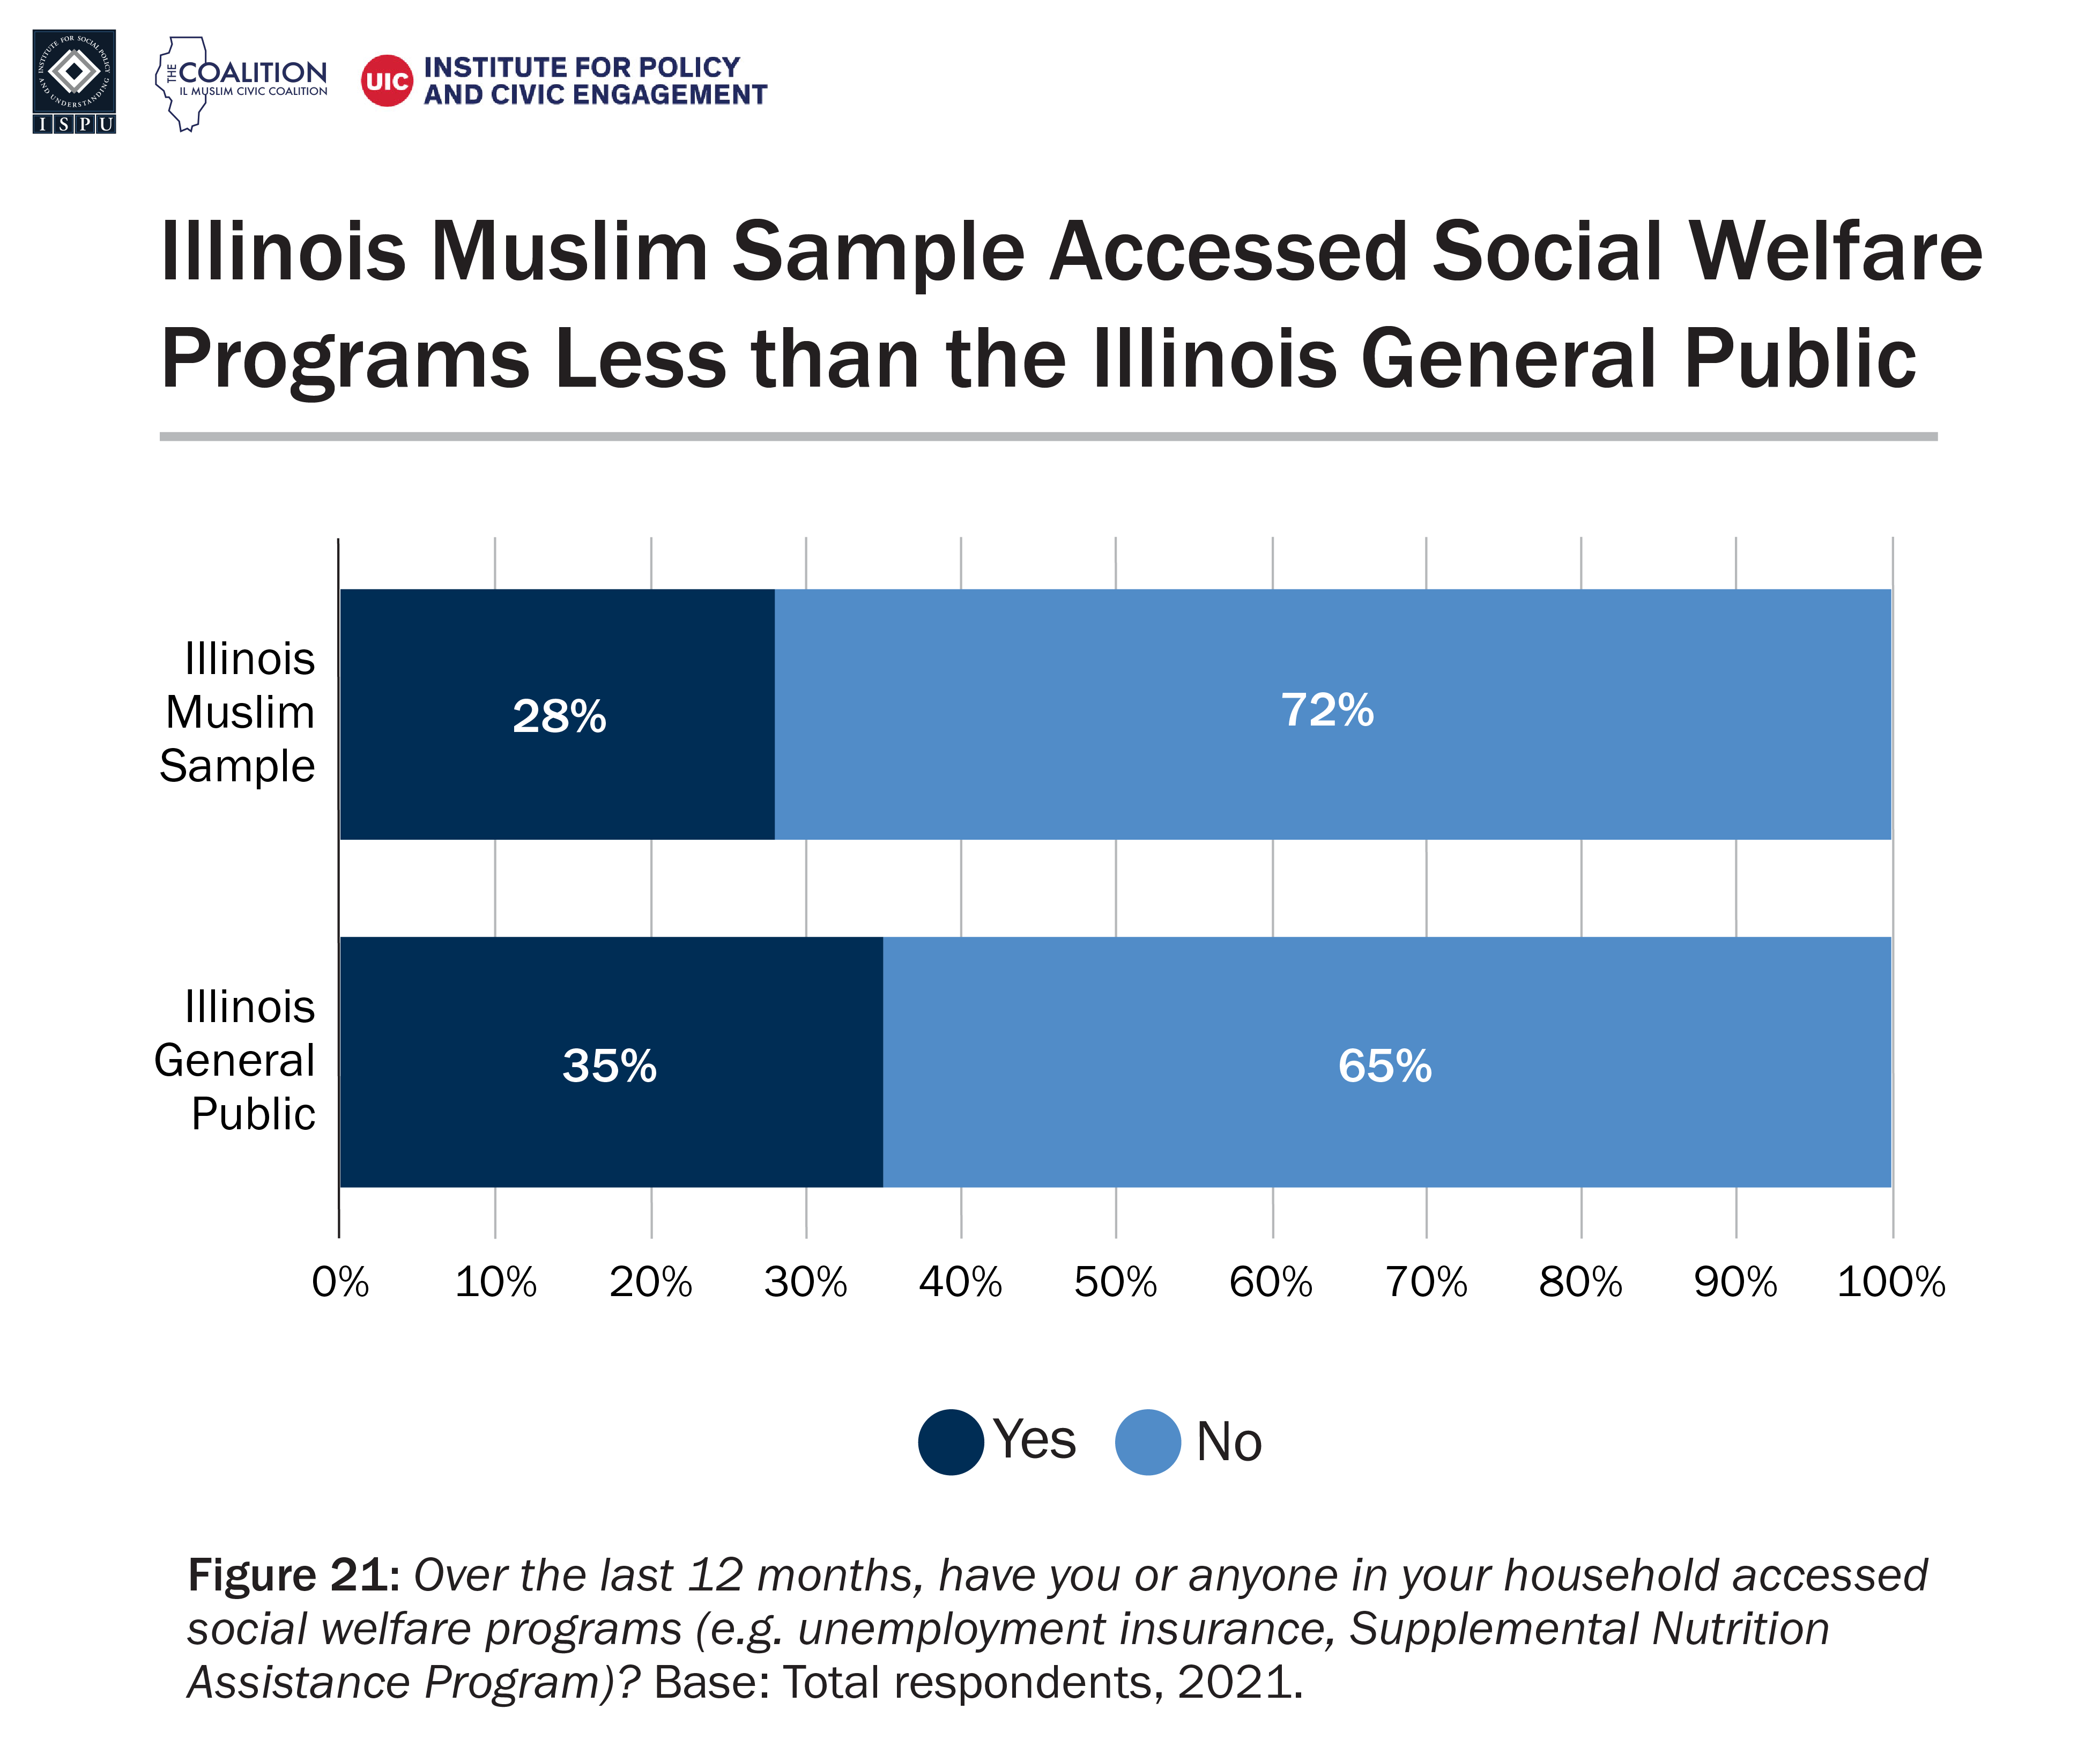 A bar graph showing the percentage of the Illinois Muslim sample and Illinois general public who have accessed social welfare programs